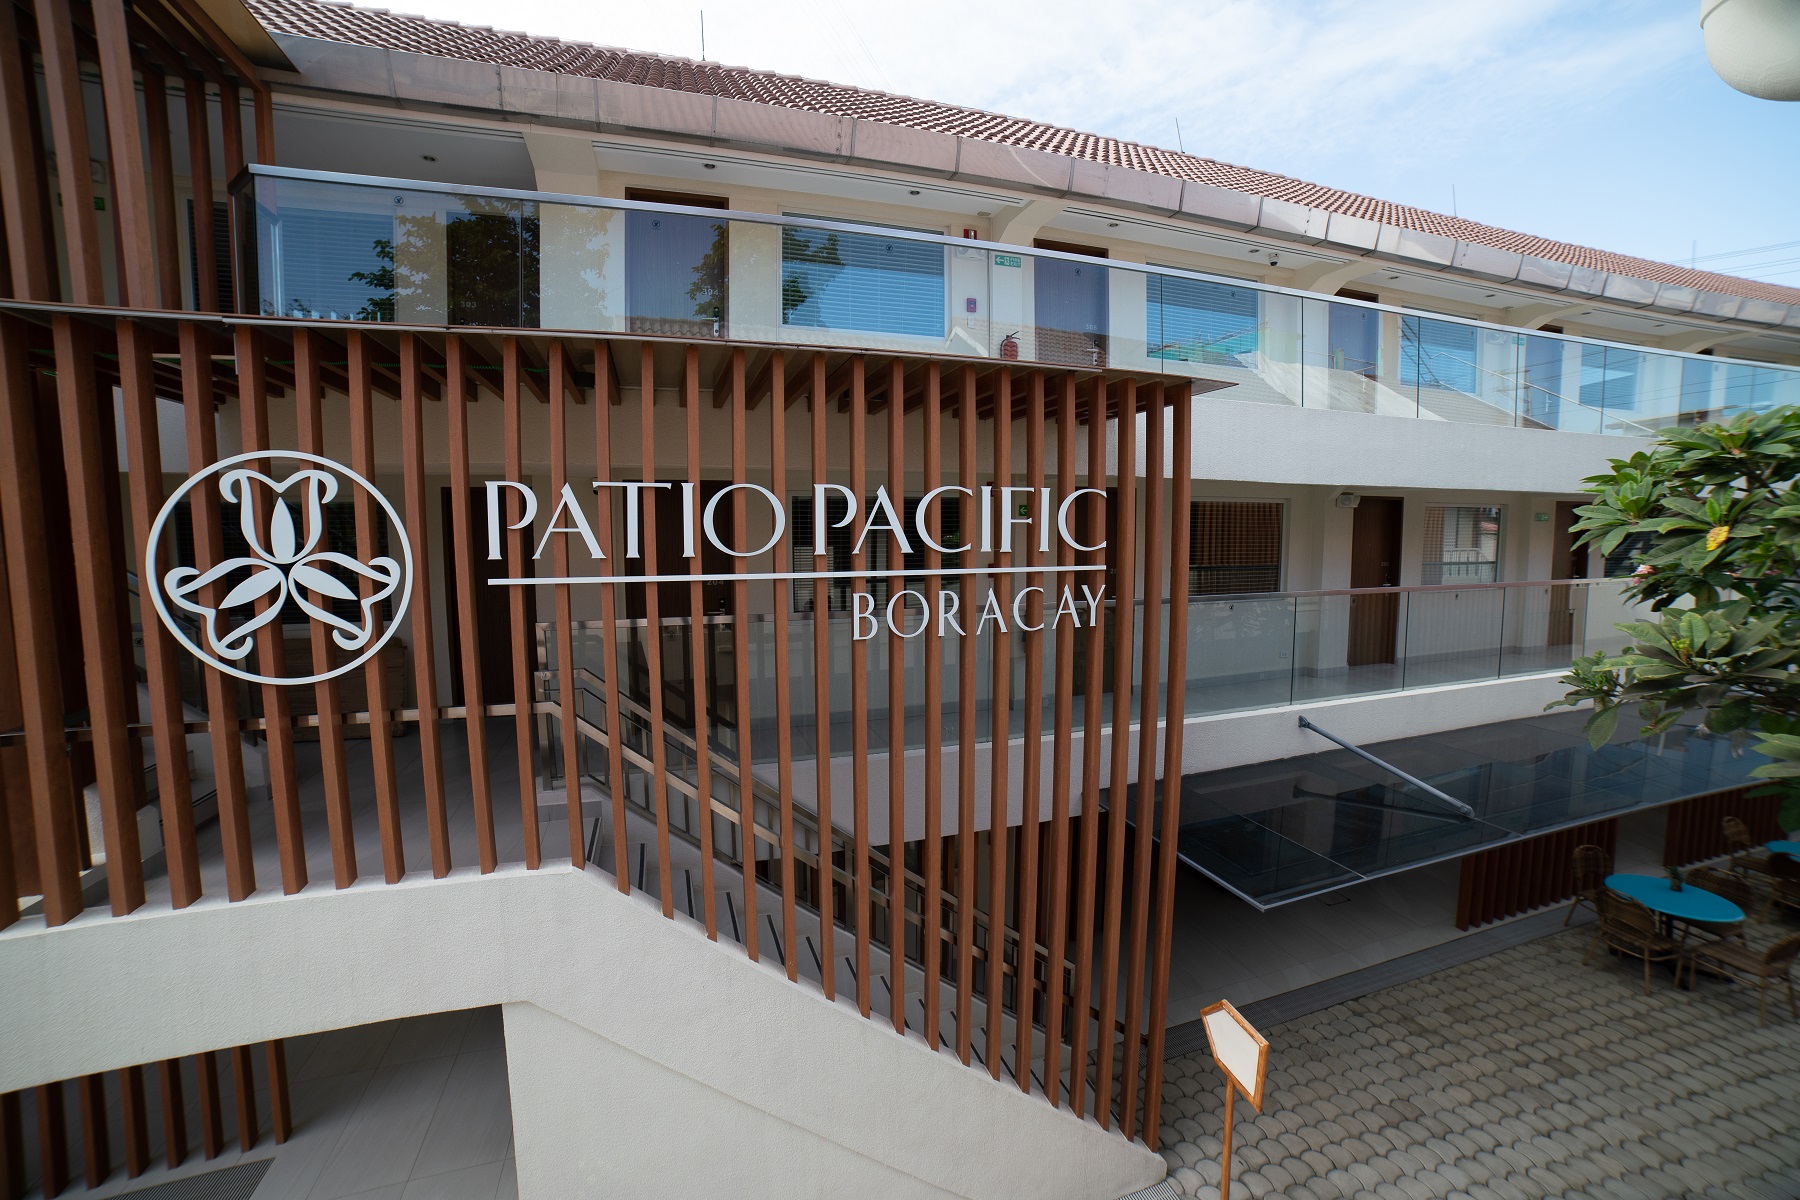 PATIO PACIFIC BORACAY (NON BEACHFRONT) PROMO C: KALIBO AIRFARE ALL-IN WITH FREEBIES boracay Packages